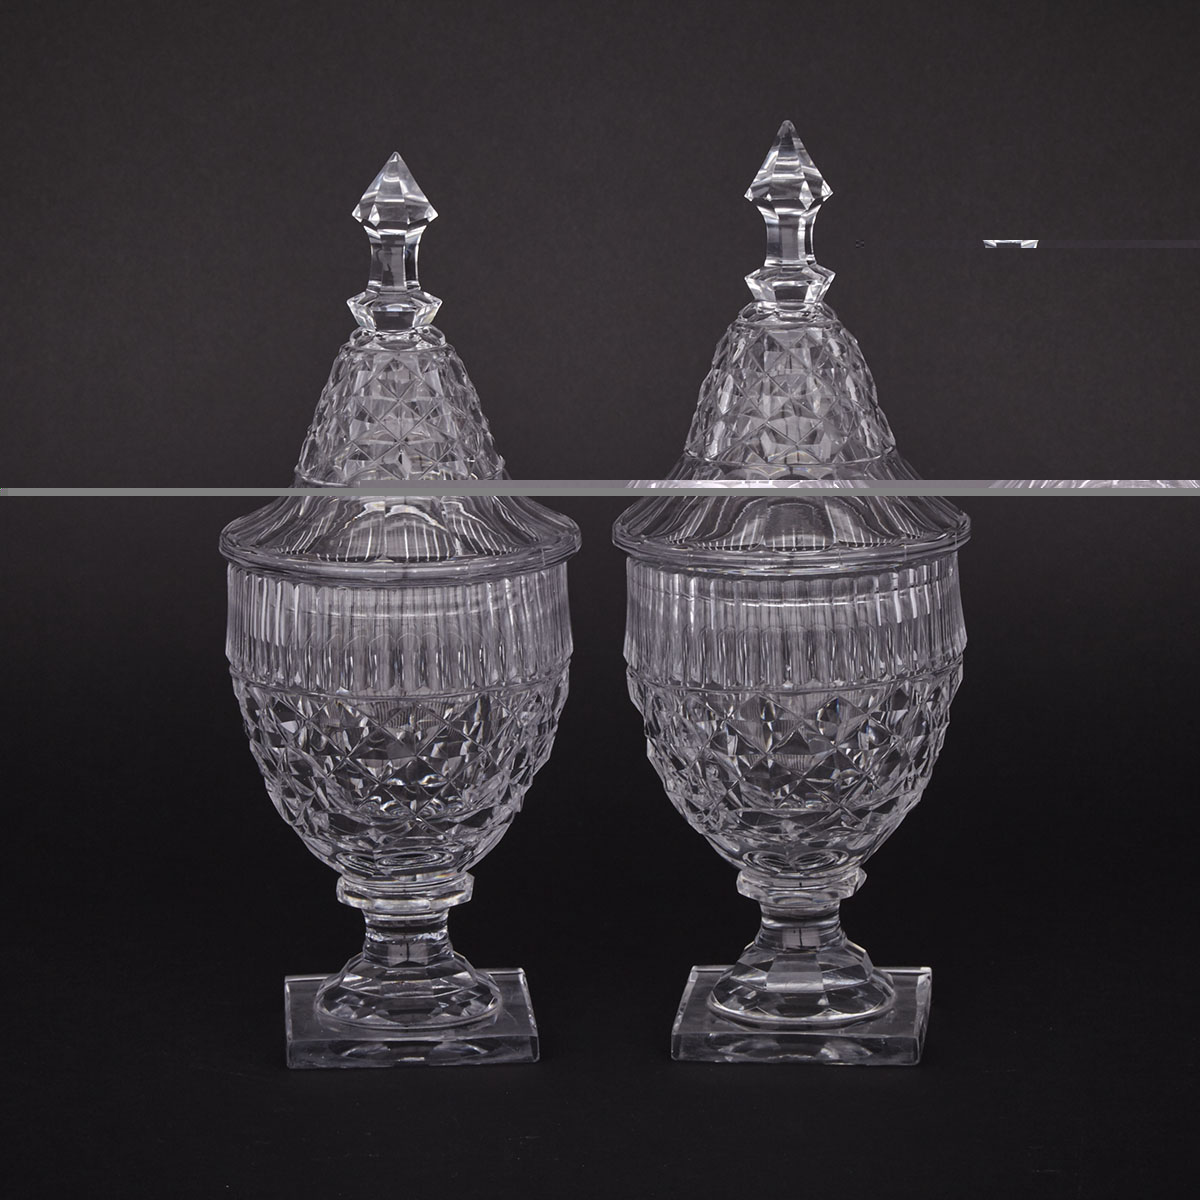 Pair of Anglo-Irish Cut Glass Sweetmeat Vases with Covers, 19th century